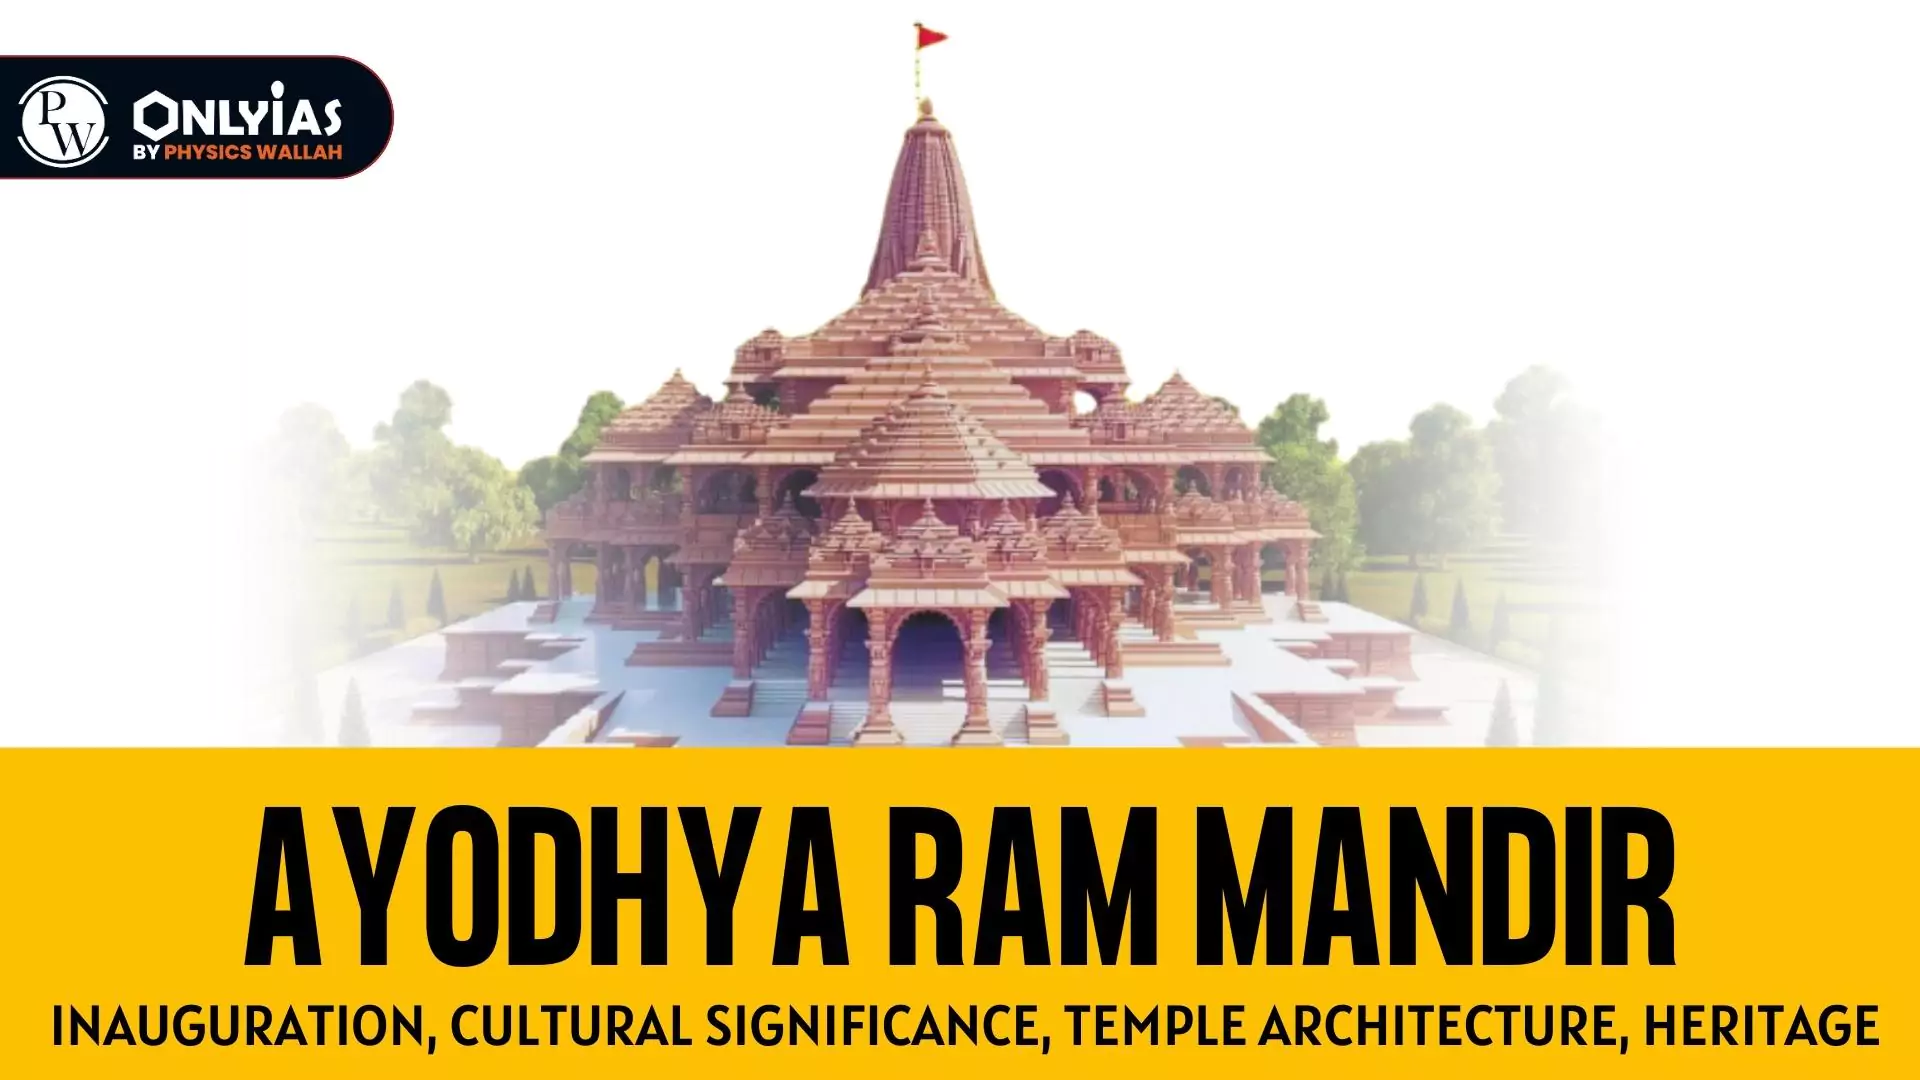 Ayodhya Ram Mandir Inauguration Cultural Significance Temple 12180 Hot Sex Picture 0820